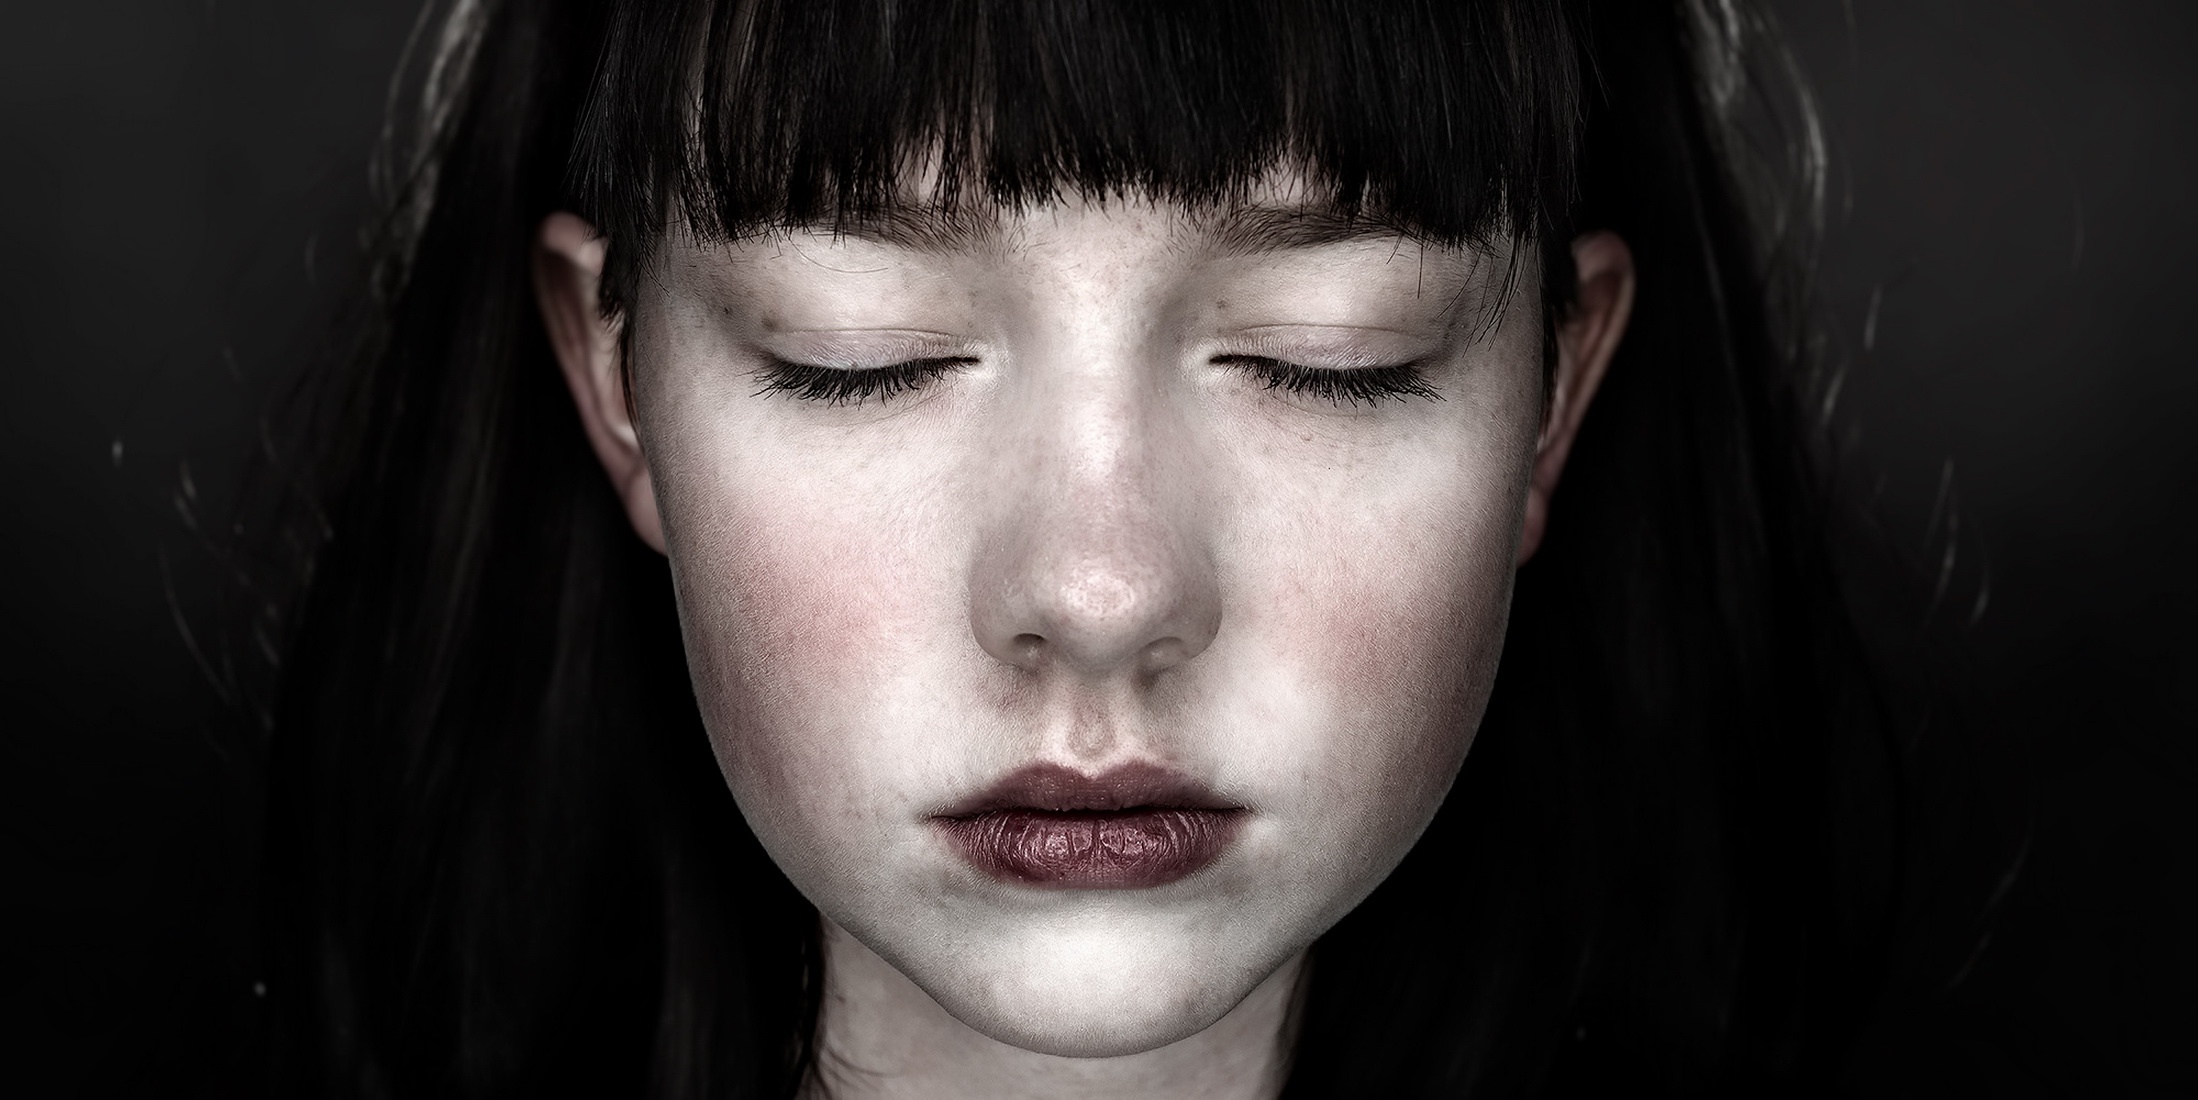 People 2198x1100 women face closed eyes portrait frontal view